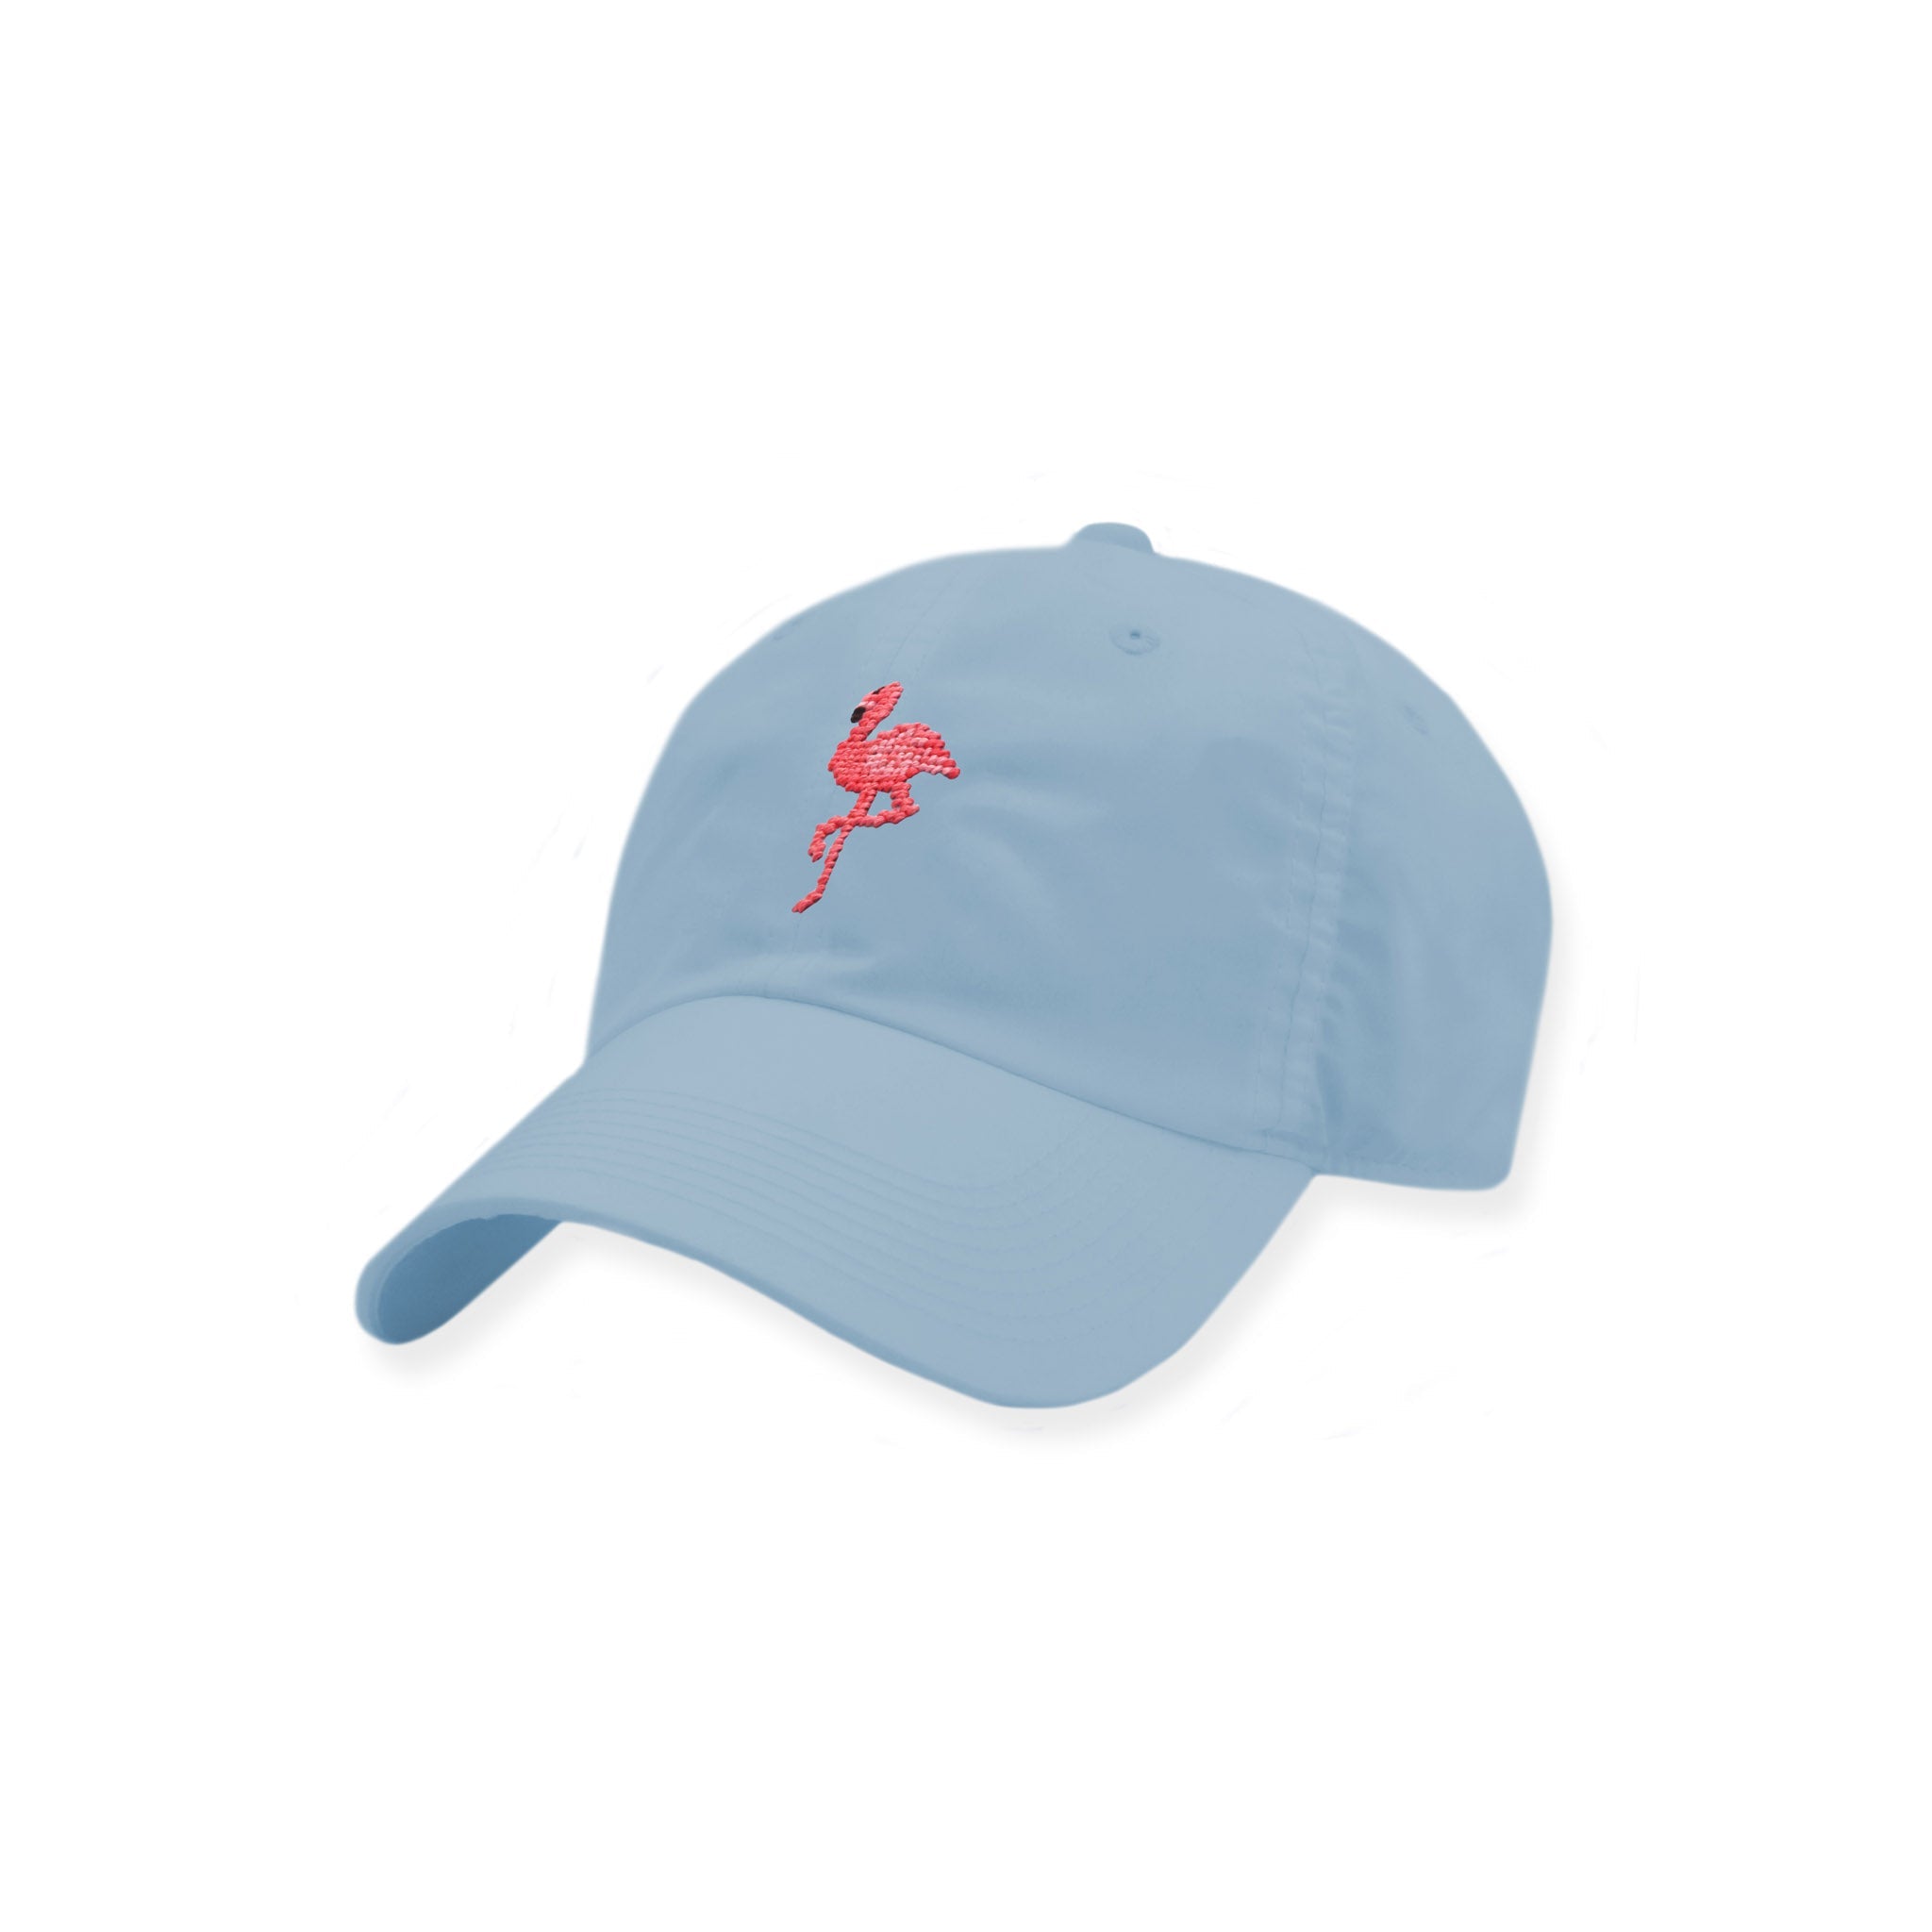 Flamingo Performance Hat by Smathers & Branson